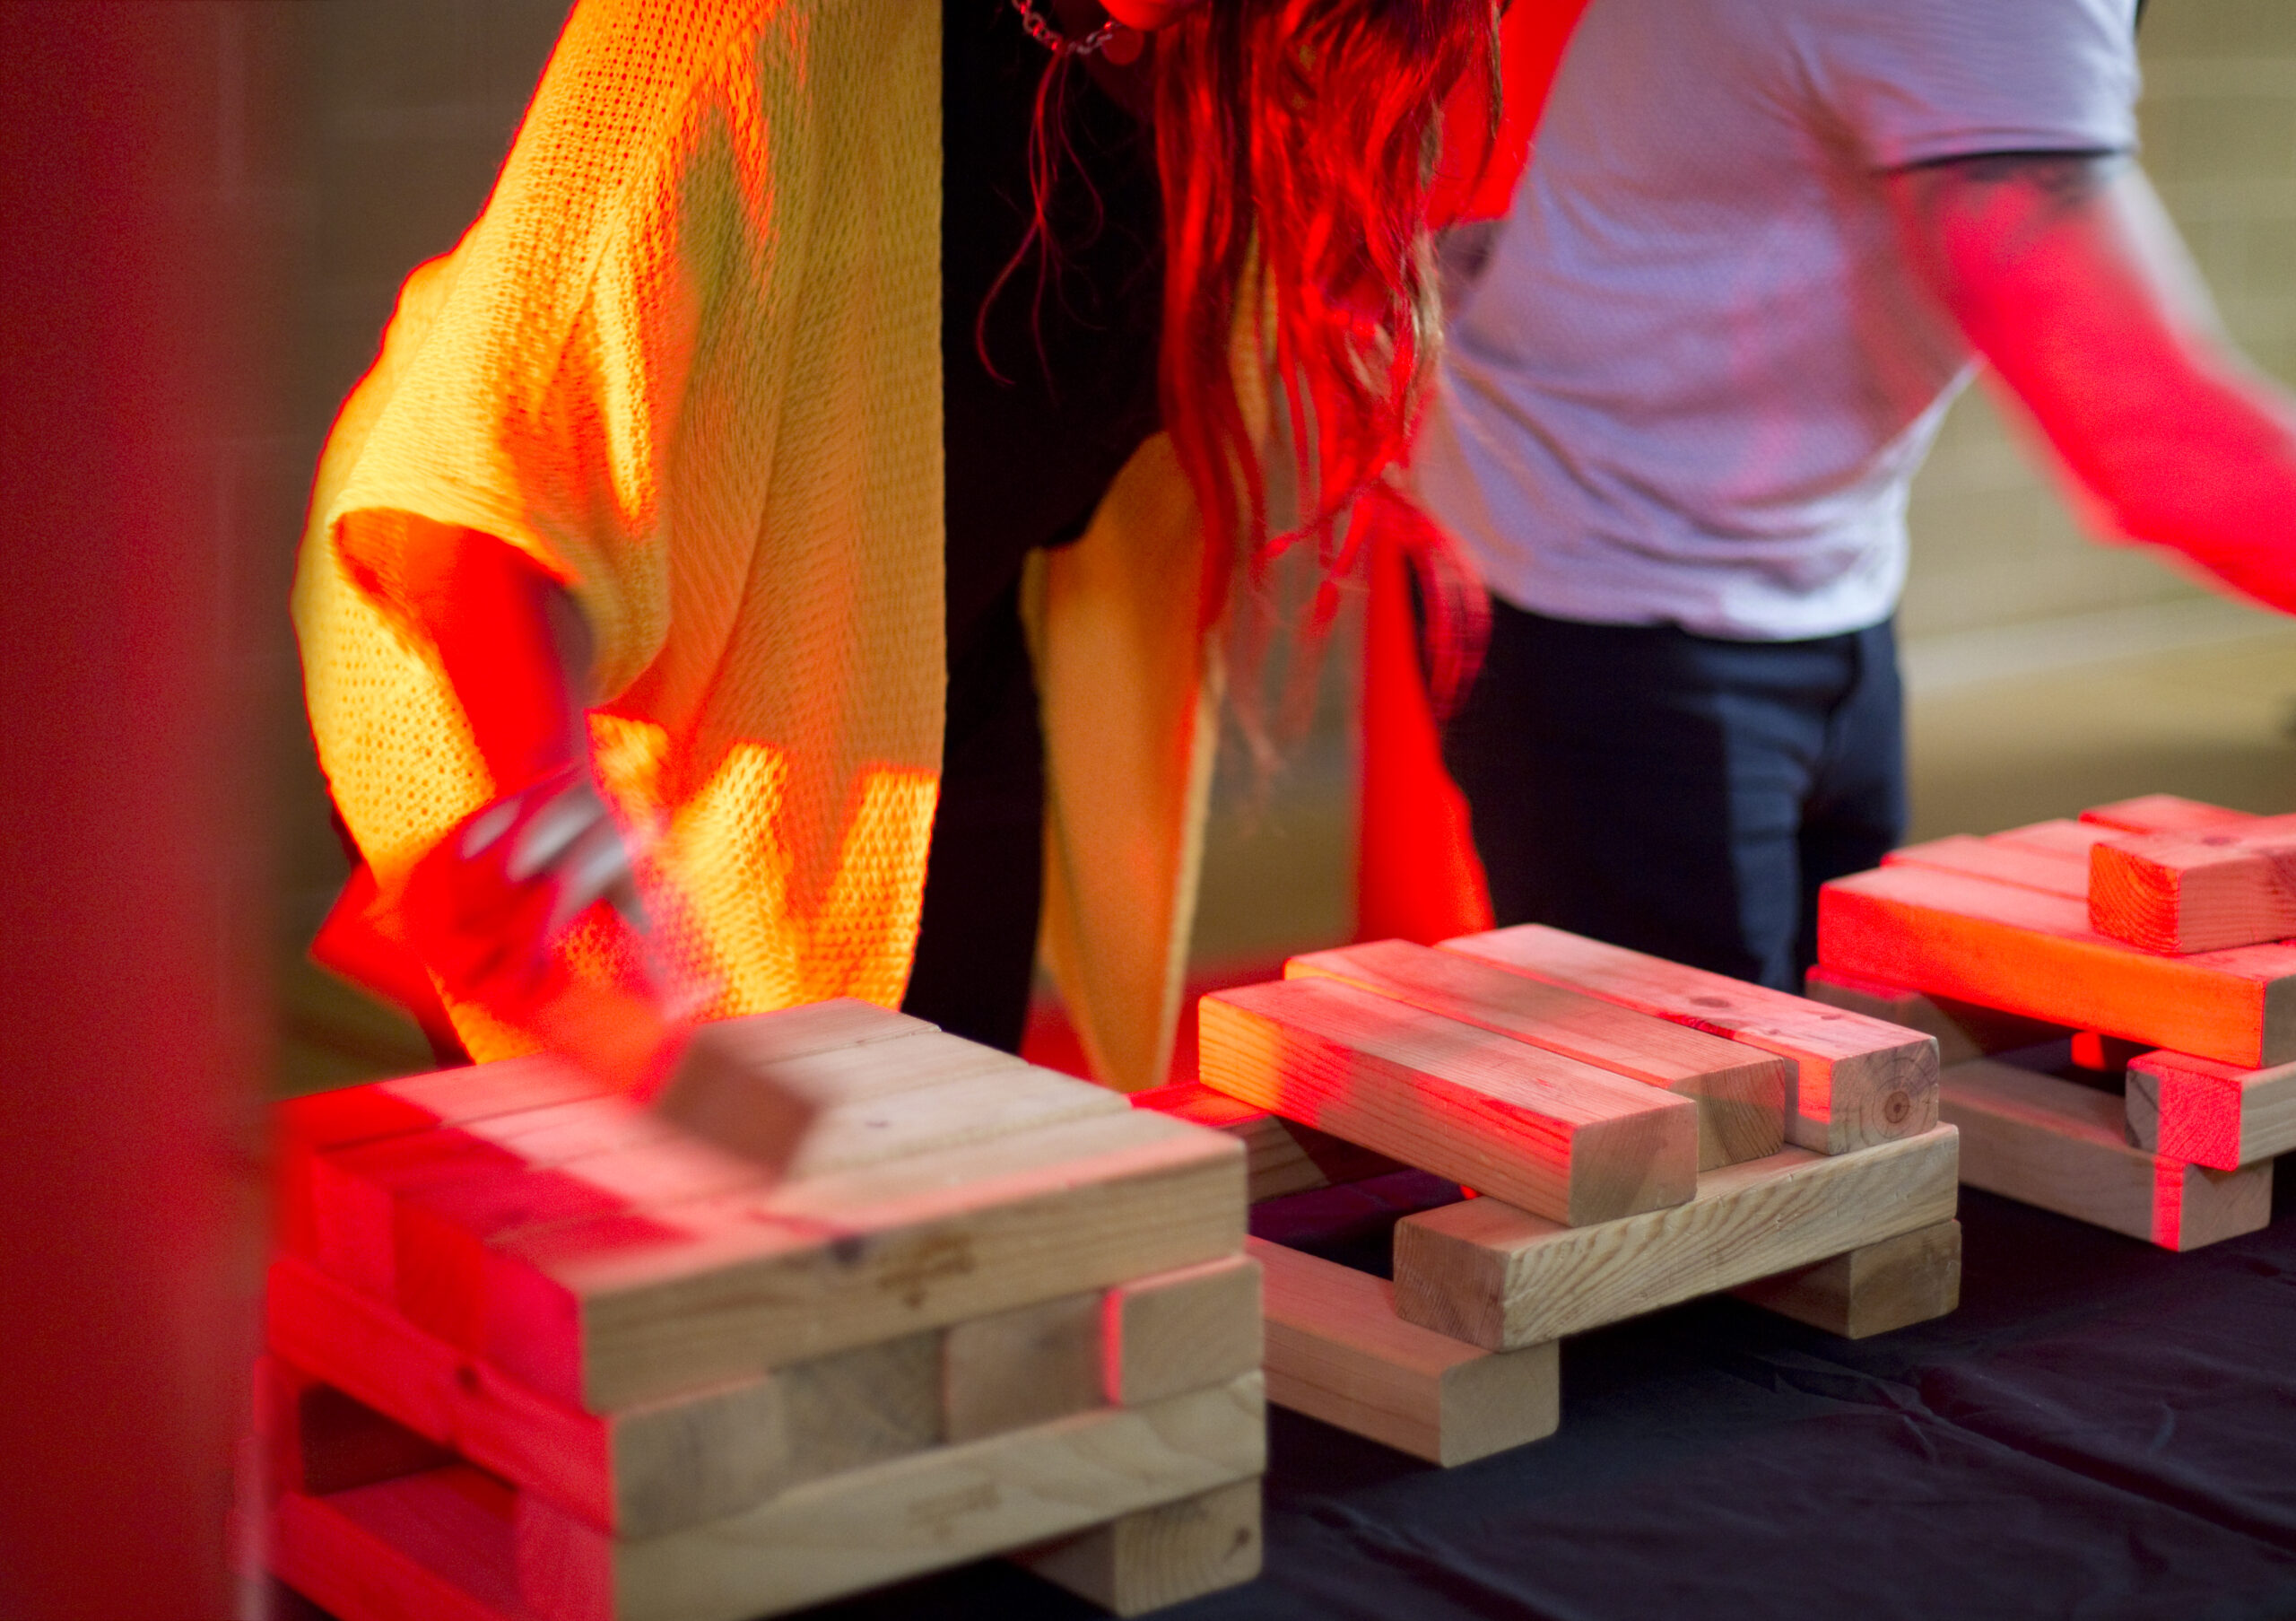 A team stacking blocks during an Under Pressure team building game